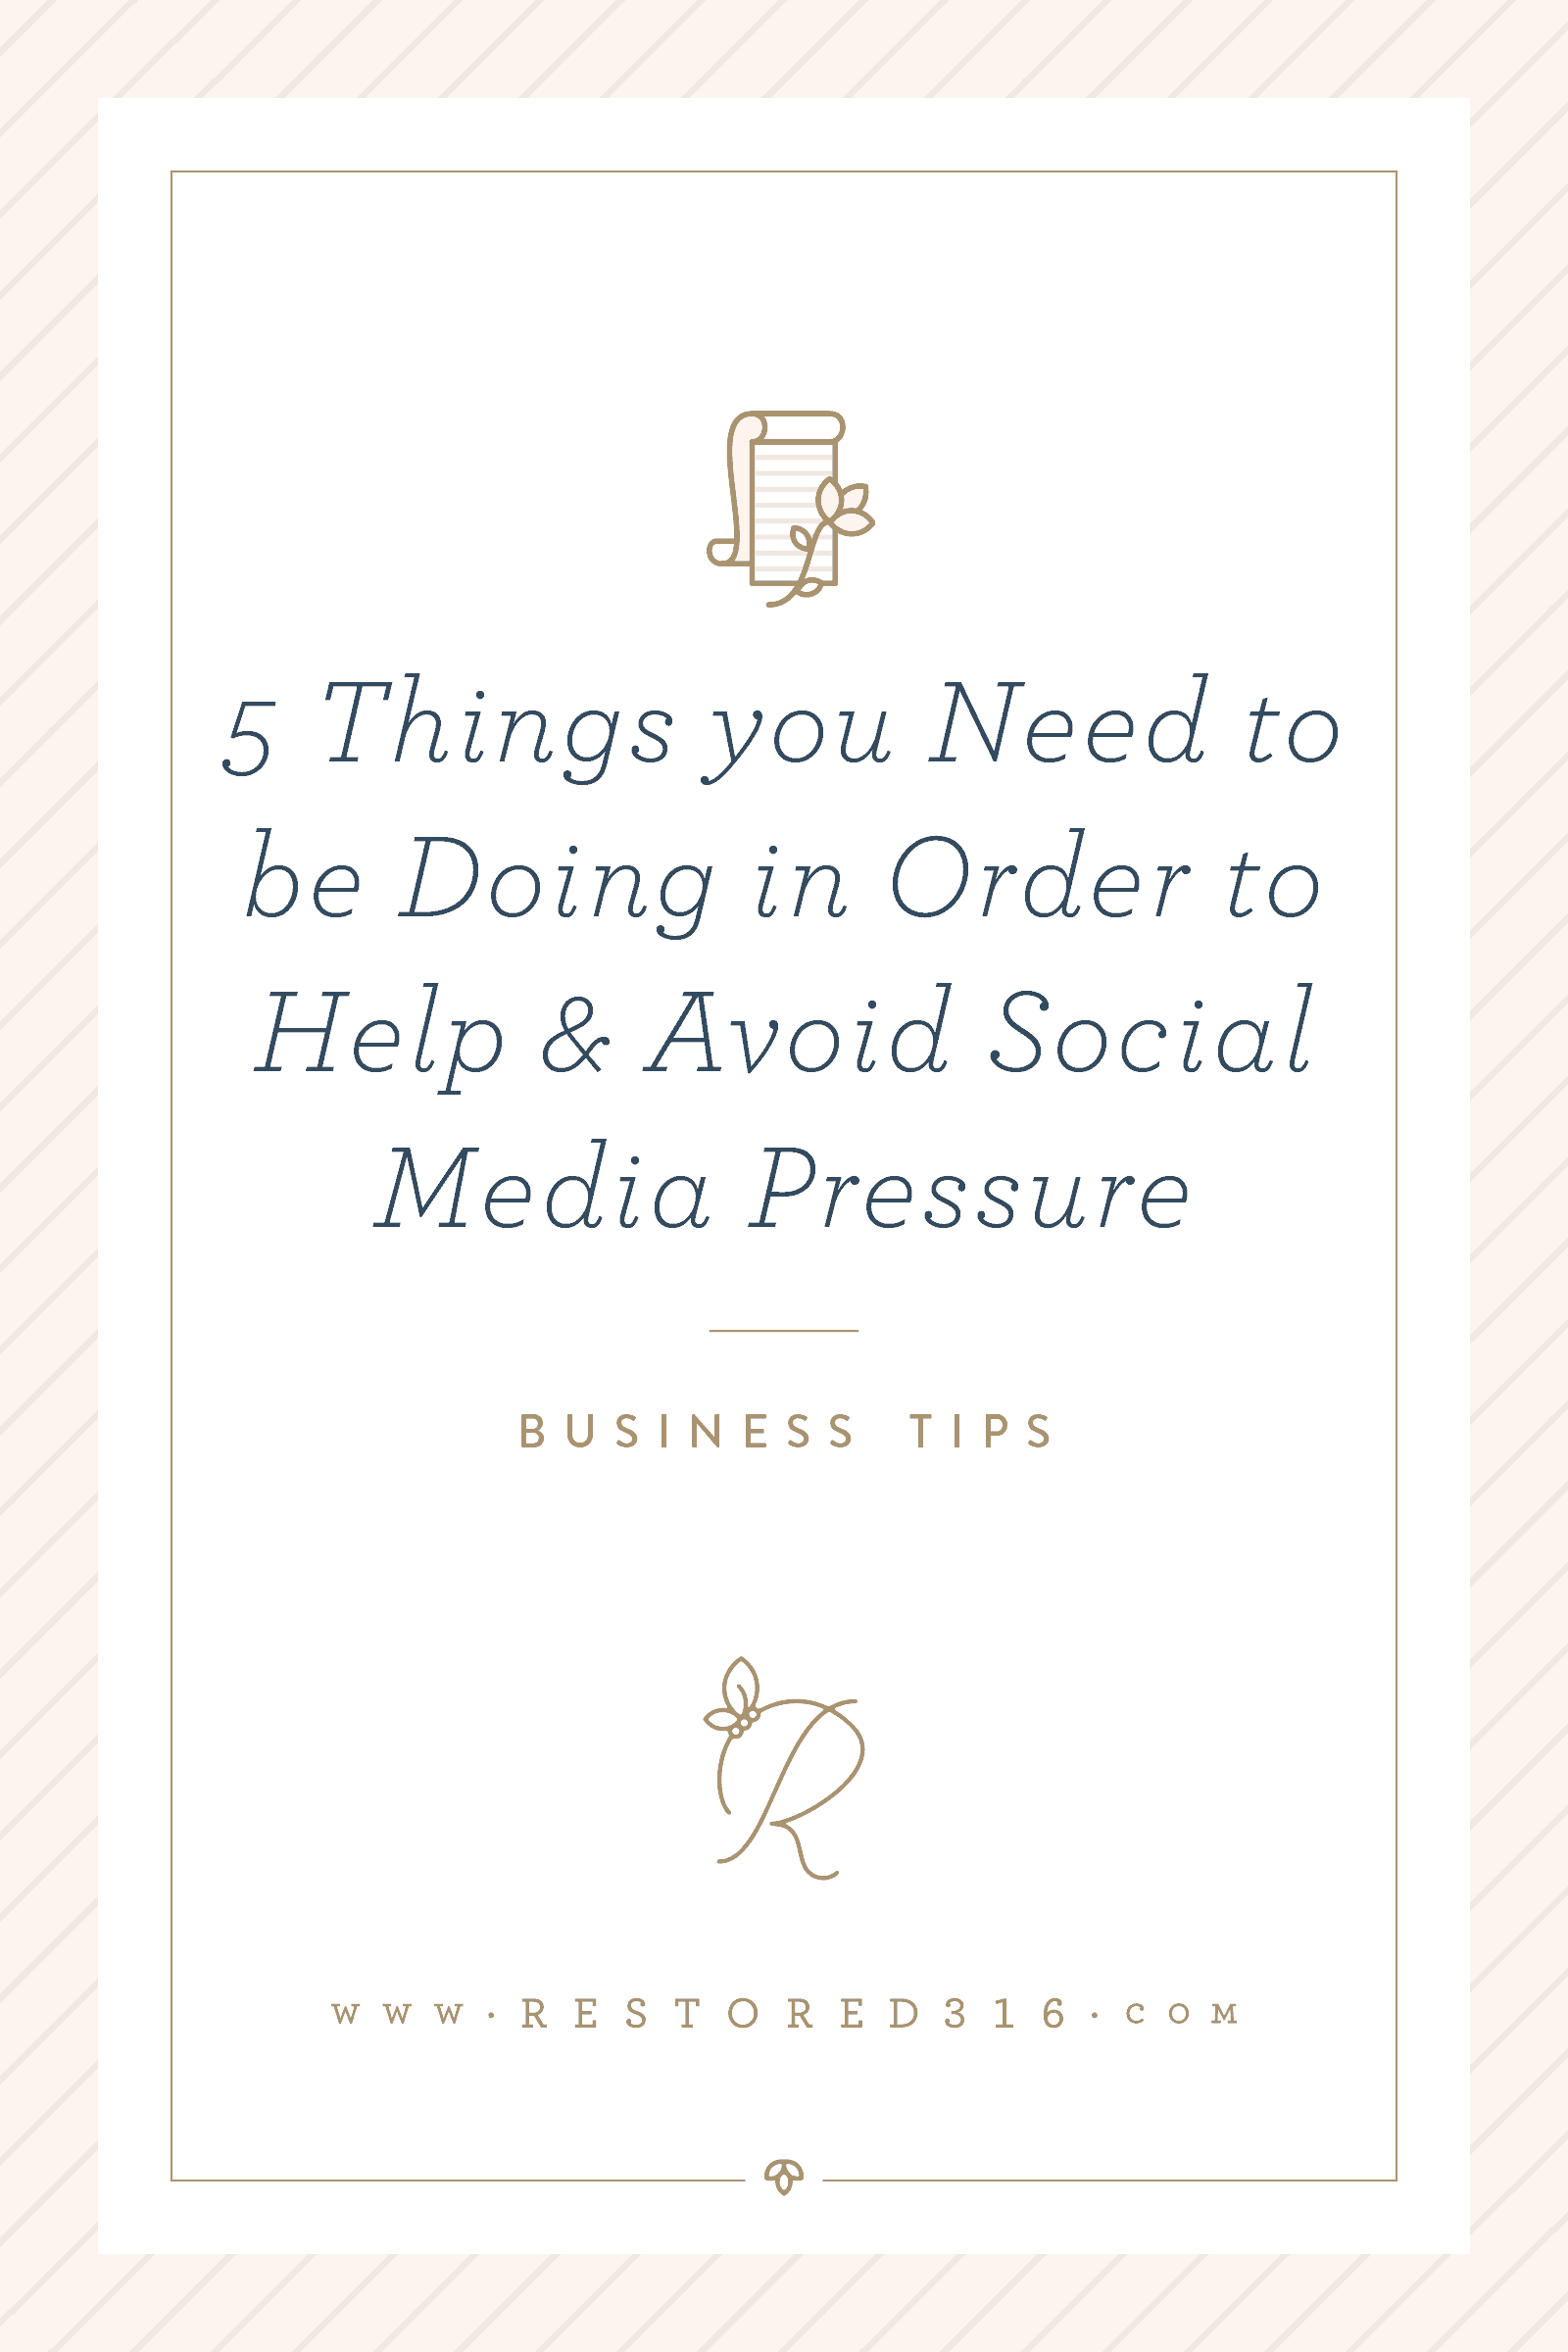 5 Things you need to be doing in order to help & avoid social media pressure